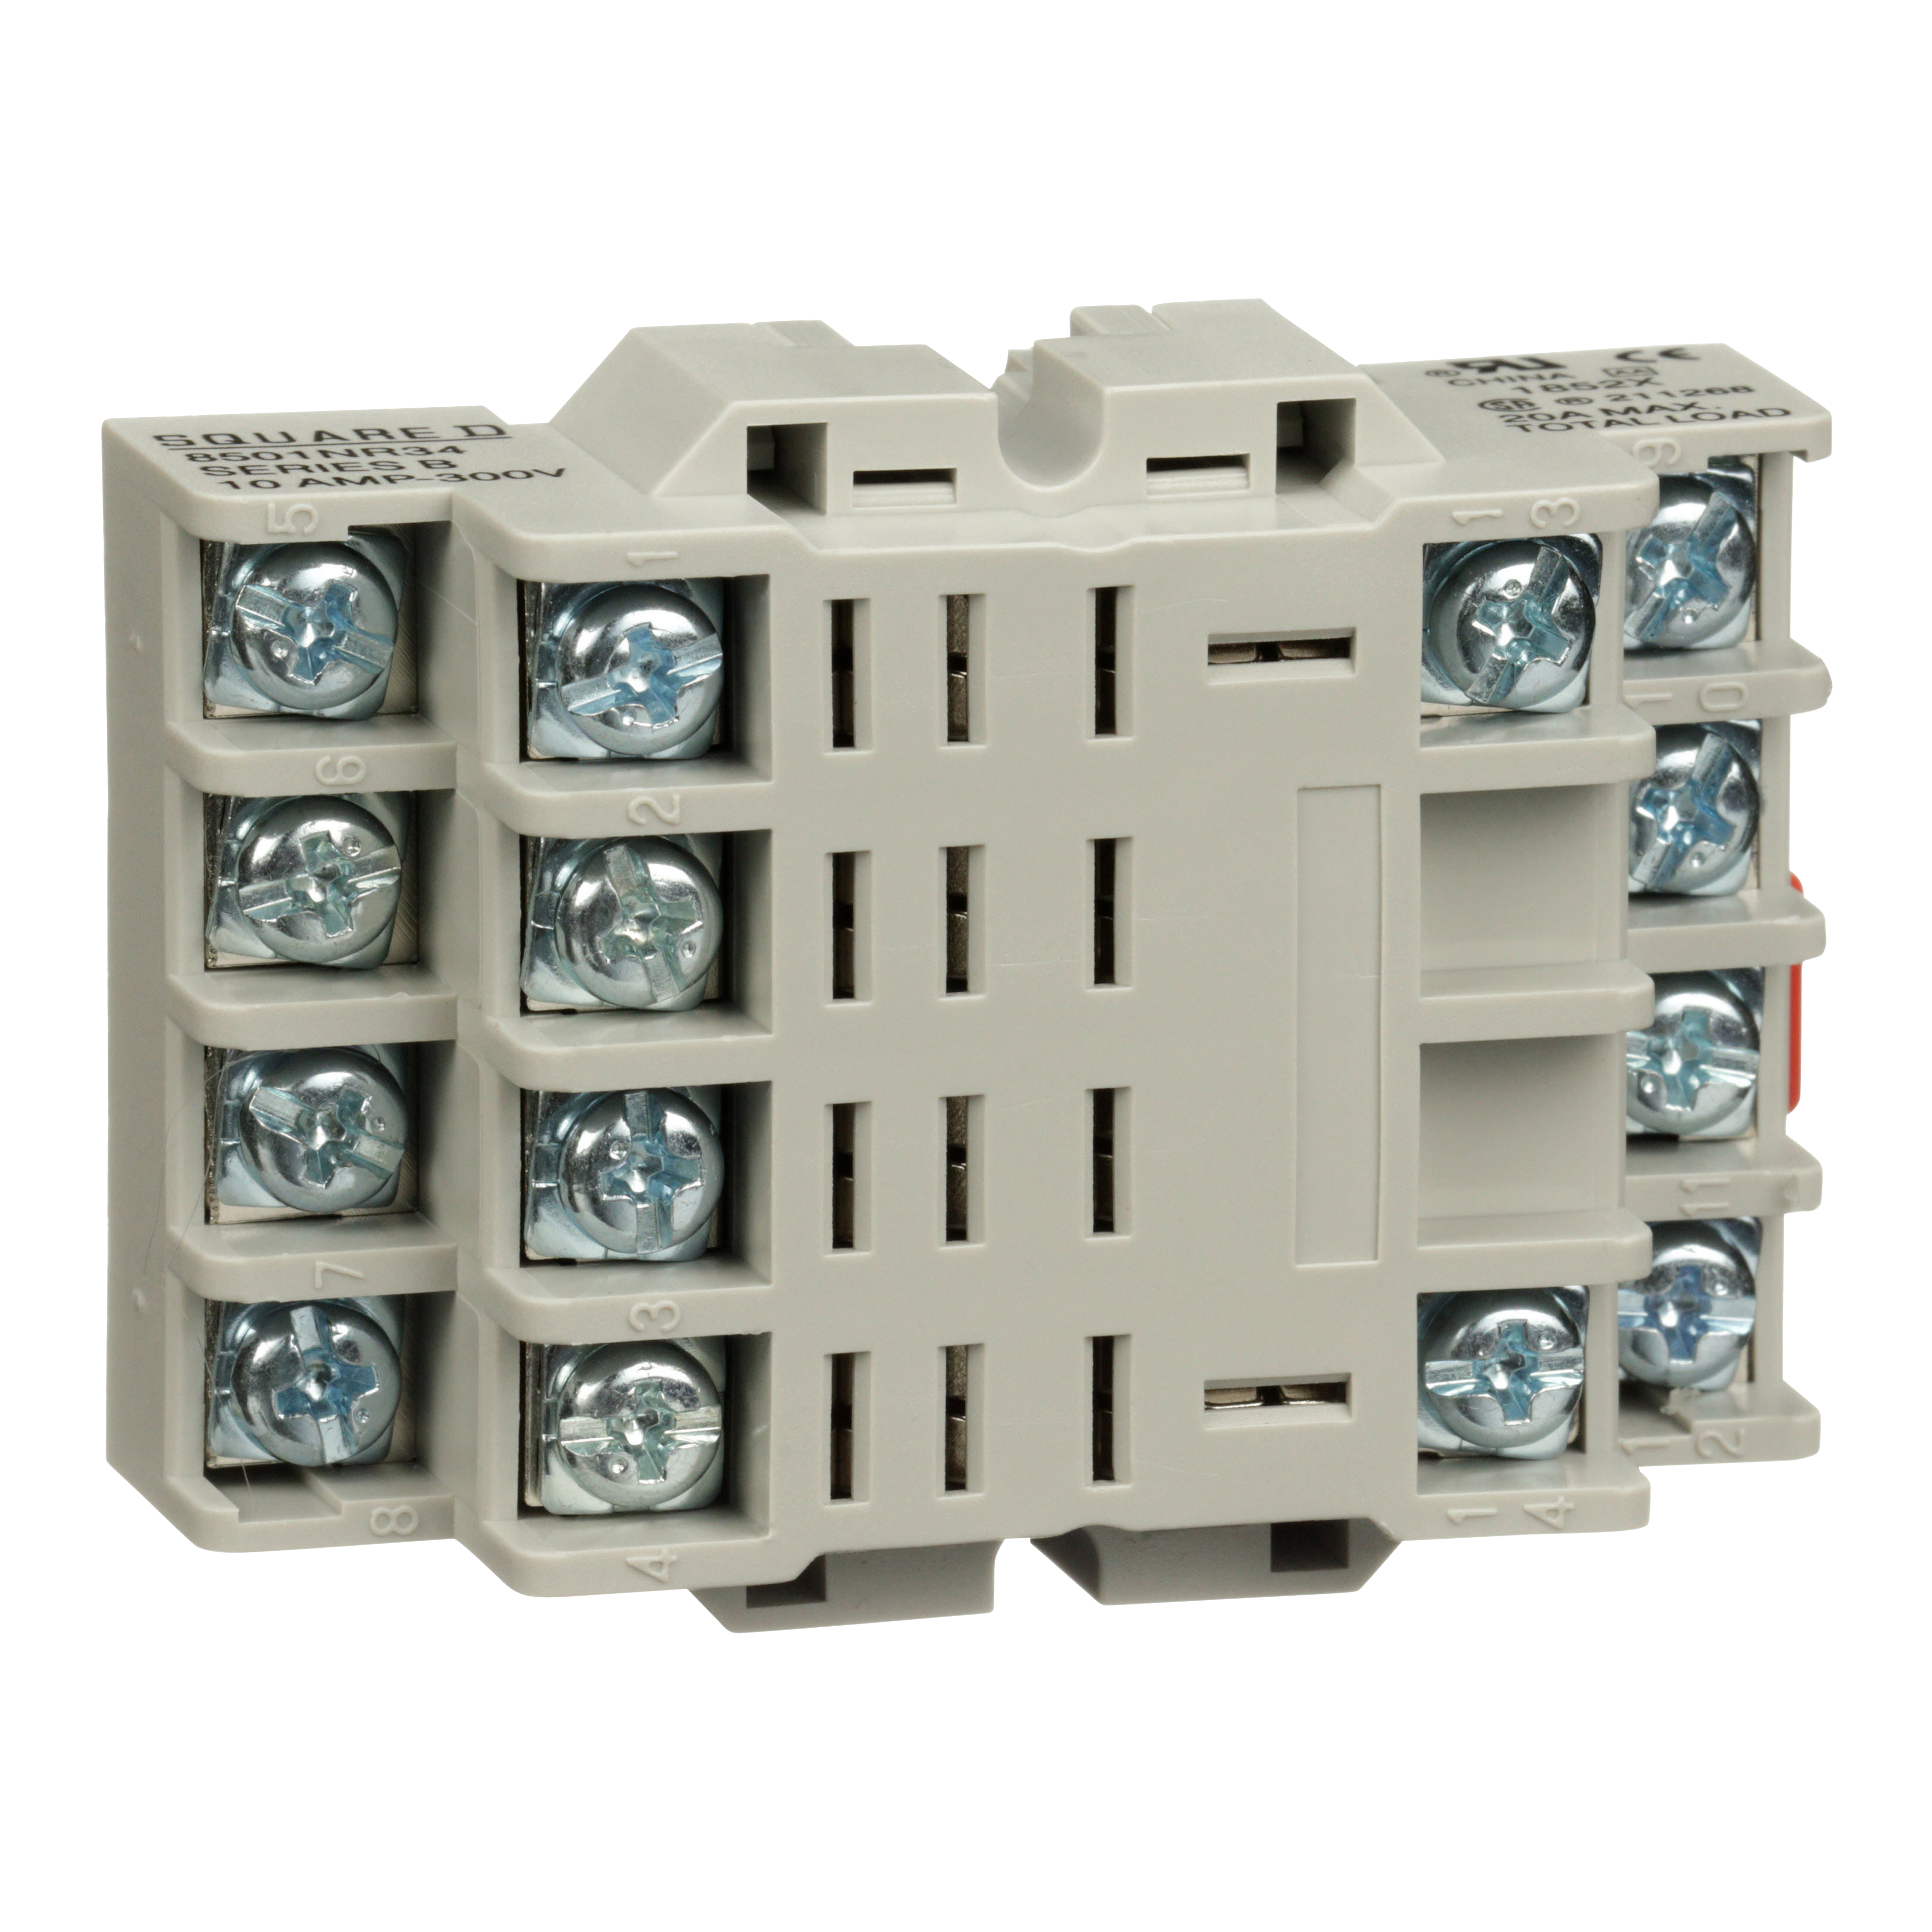 Relay Socket, Harmony 8501R, 14 pins, double tiered screw clamp terminals, DIN rail/panel mount, 10A, 300V AC